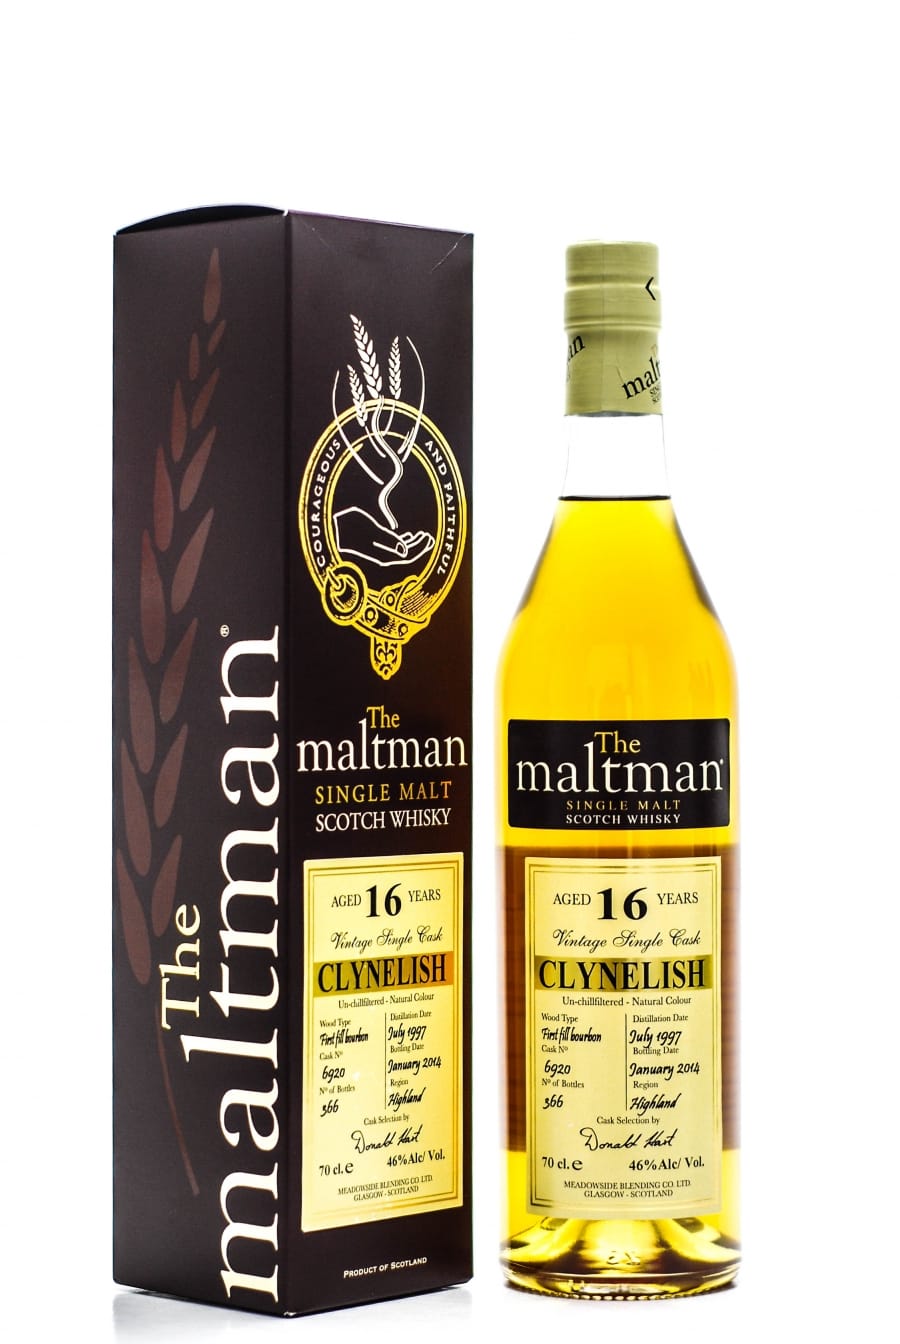 Clynelish - Clynelish 16 Years Old The Maltman Distilled: 07.1997 Bottled: 01.2014 Cask: 6920 1 Of 366 Bottles 46% 1997 Perfect